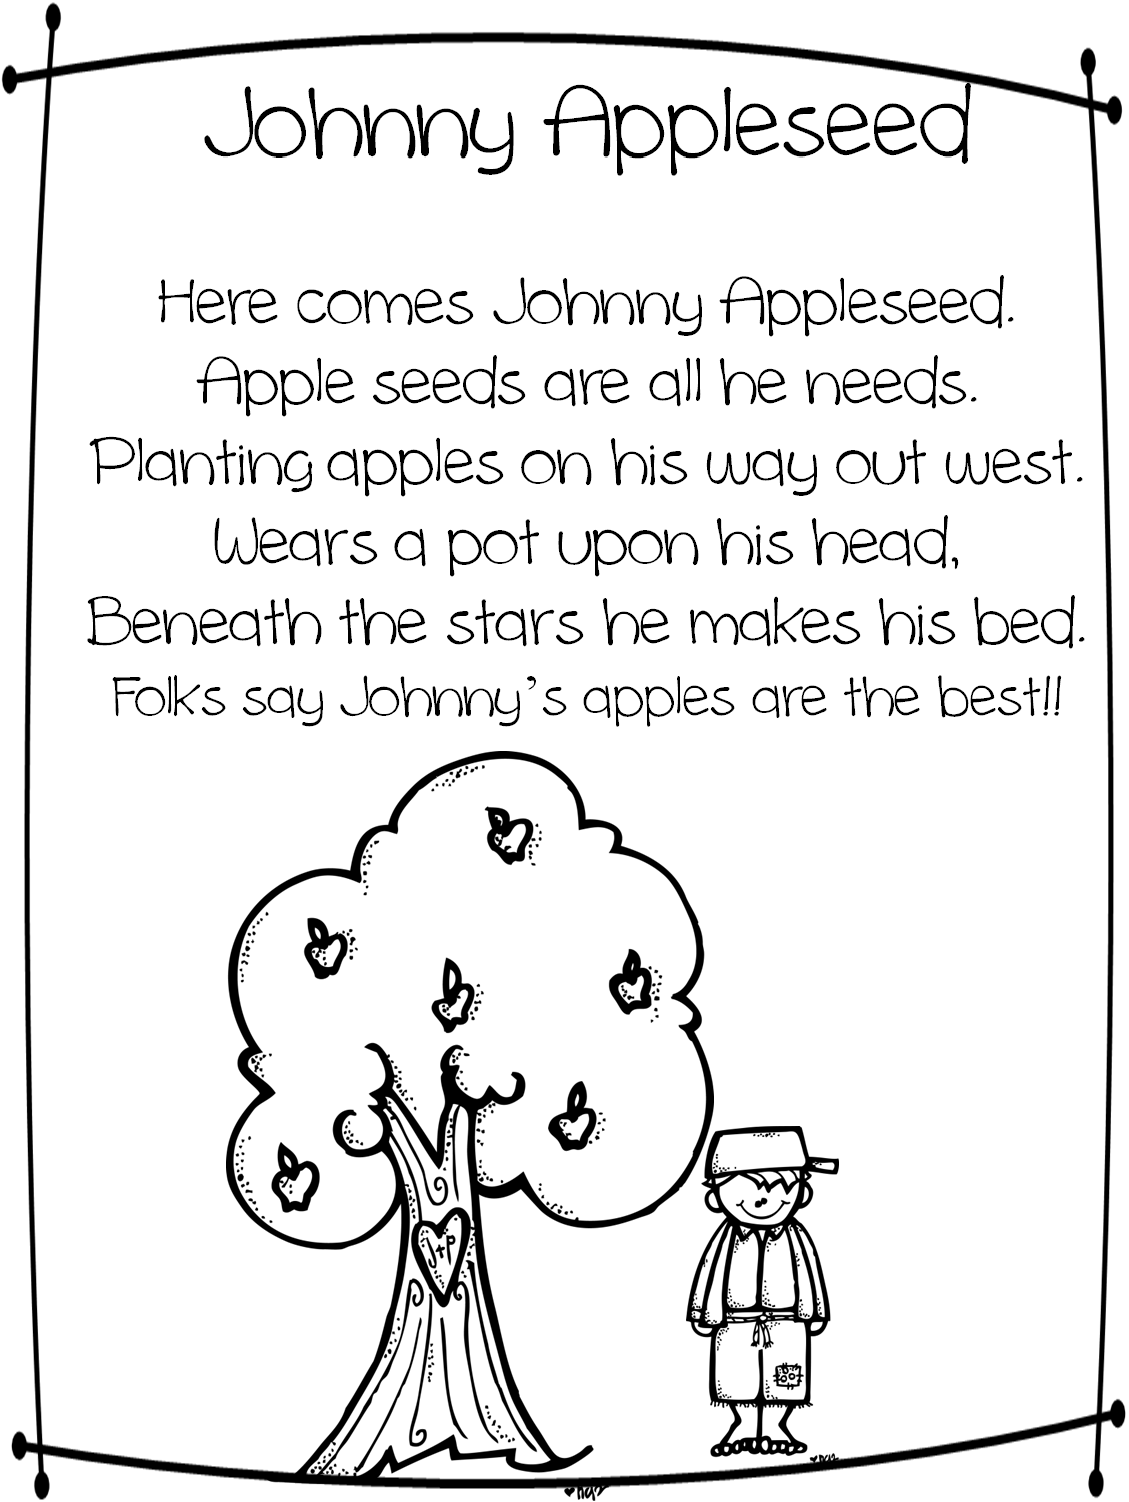 Johnny Appleseed Quotes. QuotesGram